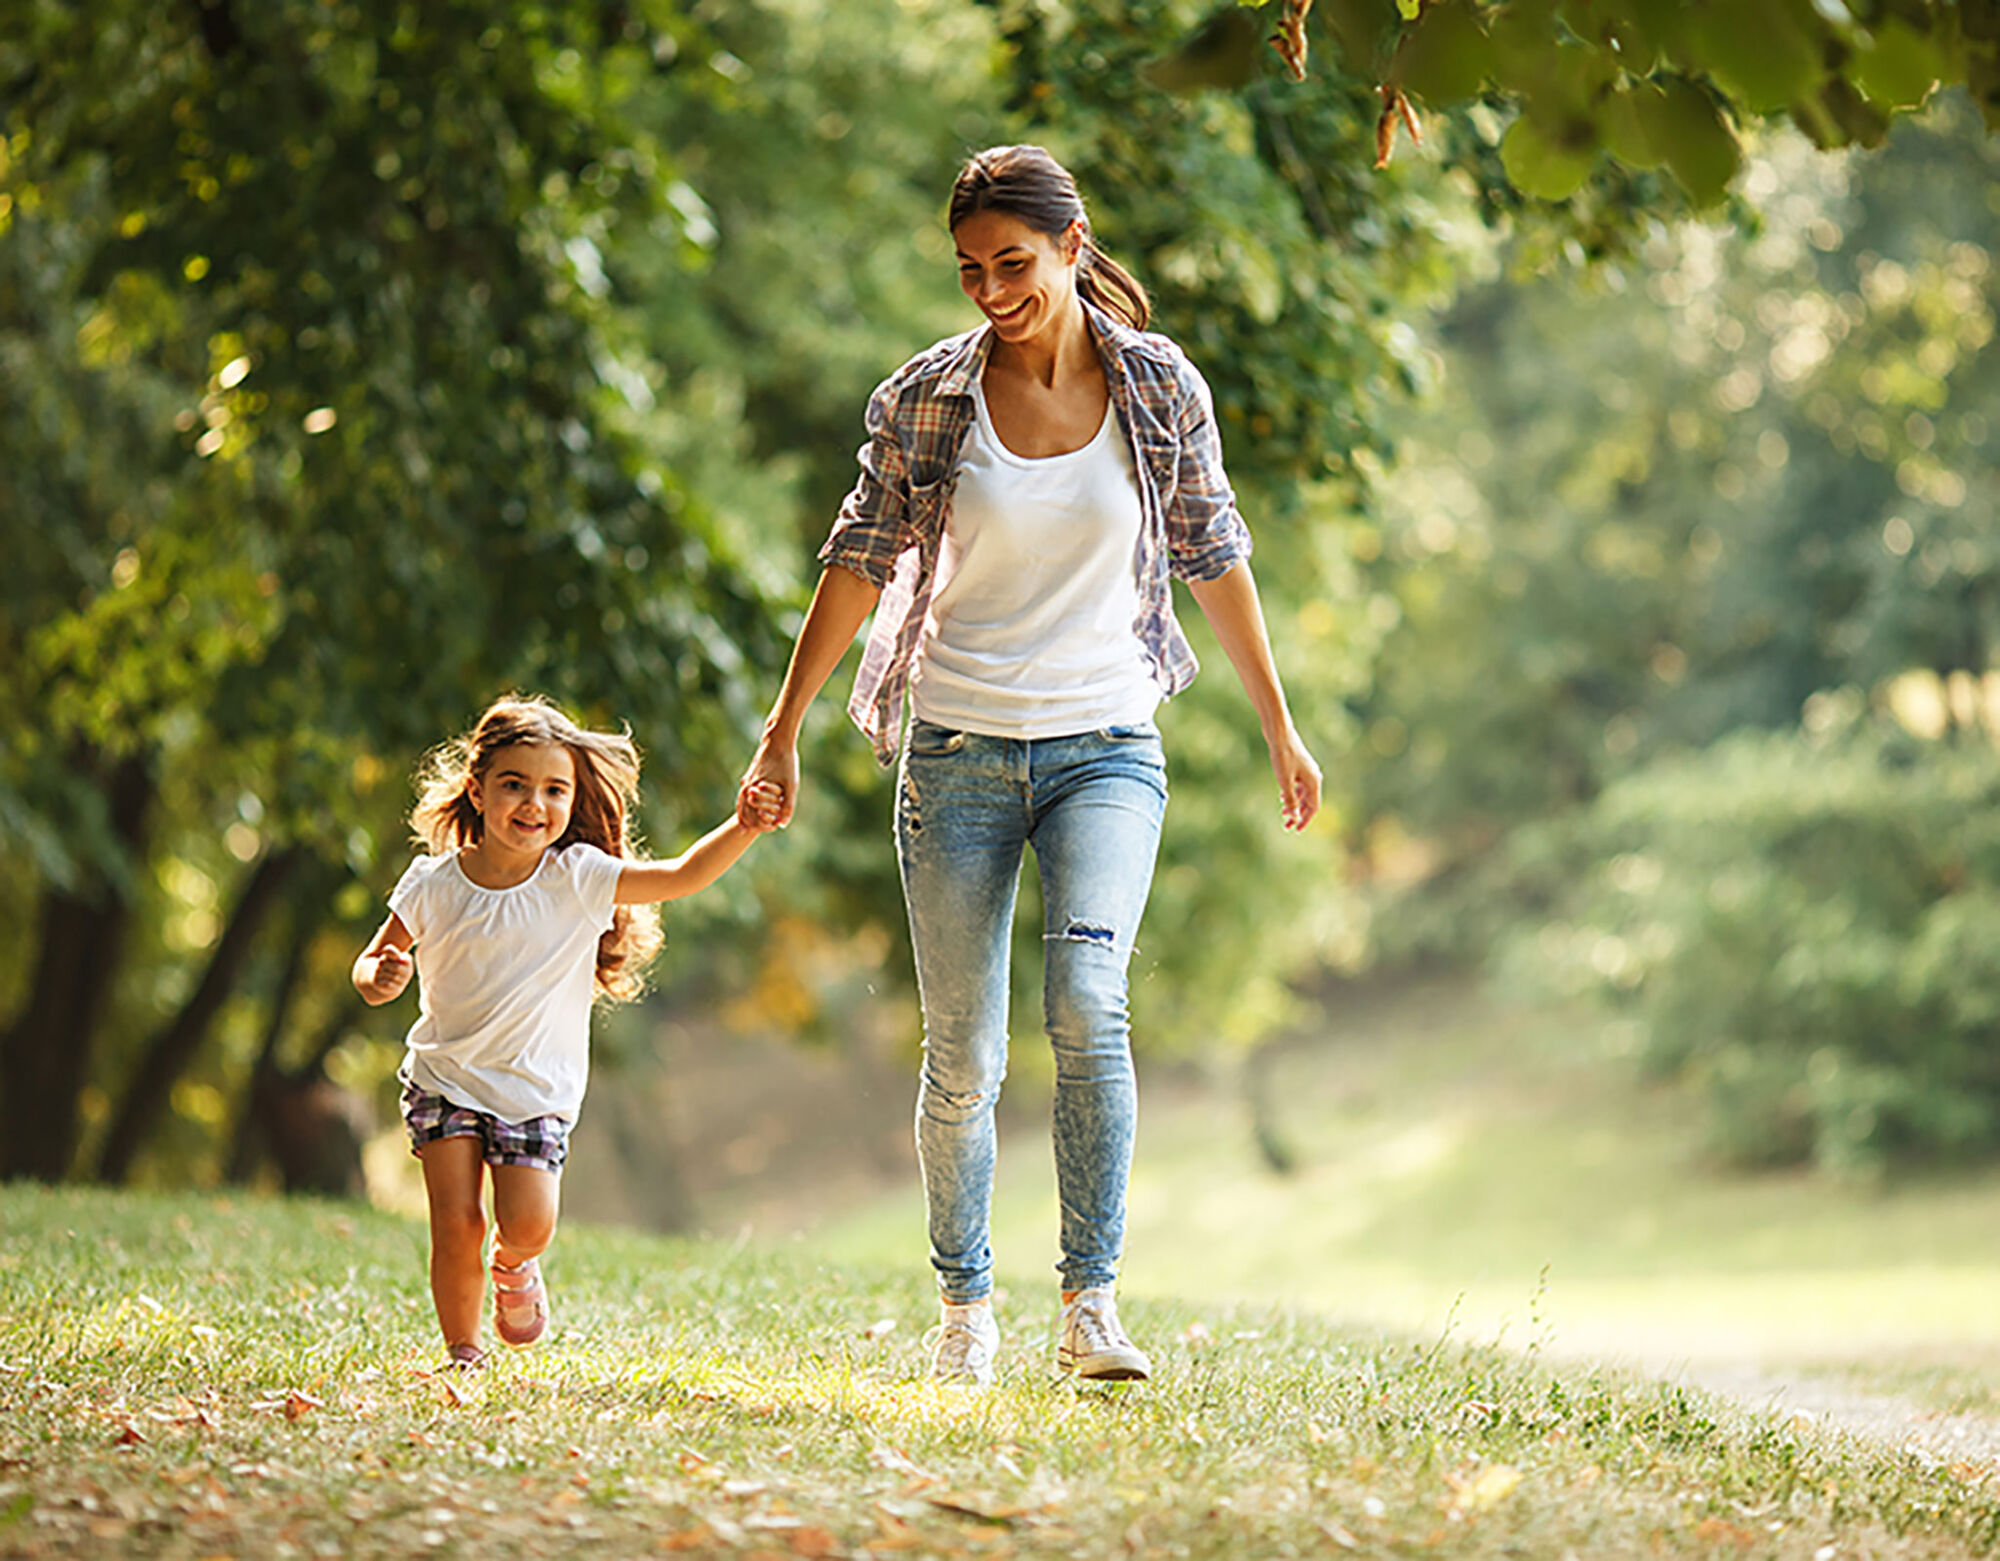 A mother and daughter running through a grassy area surrounded by trees.